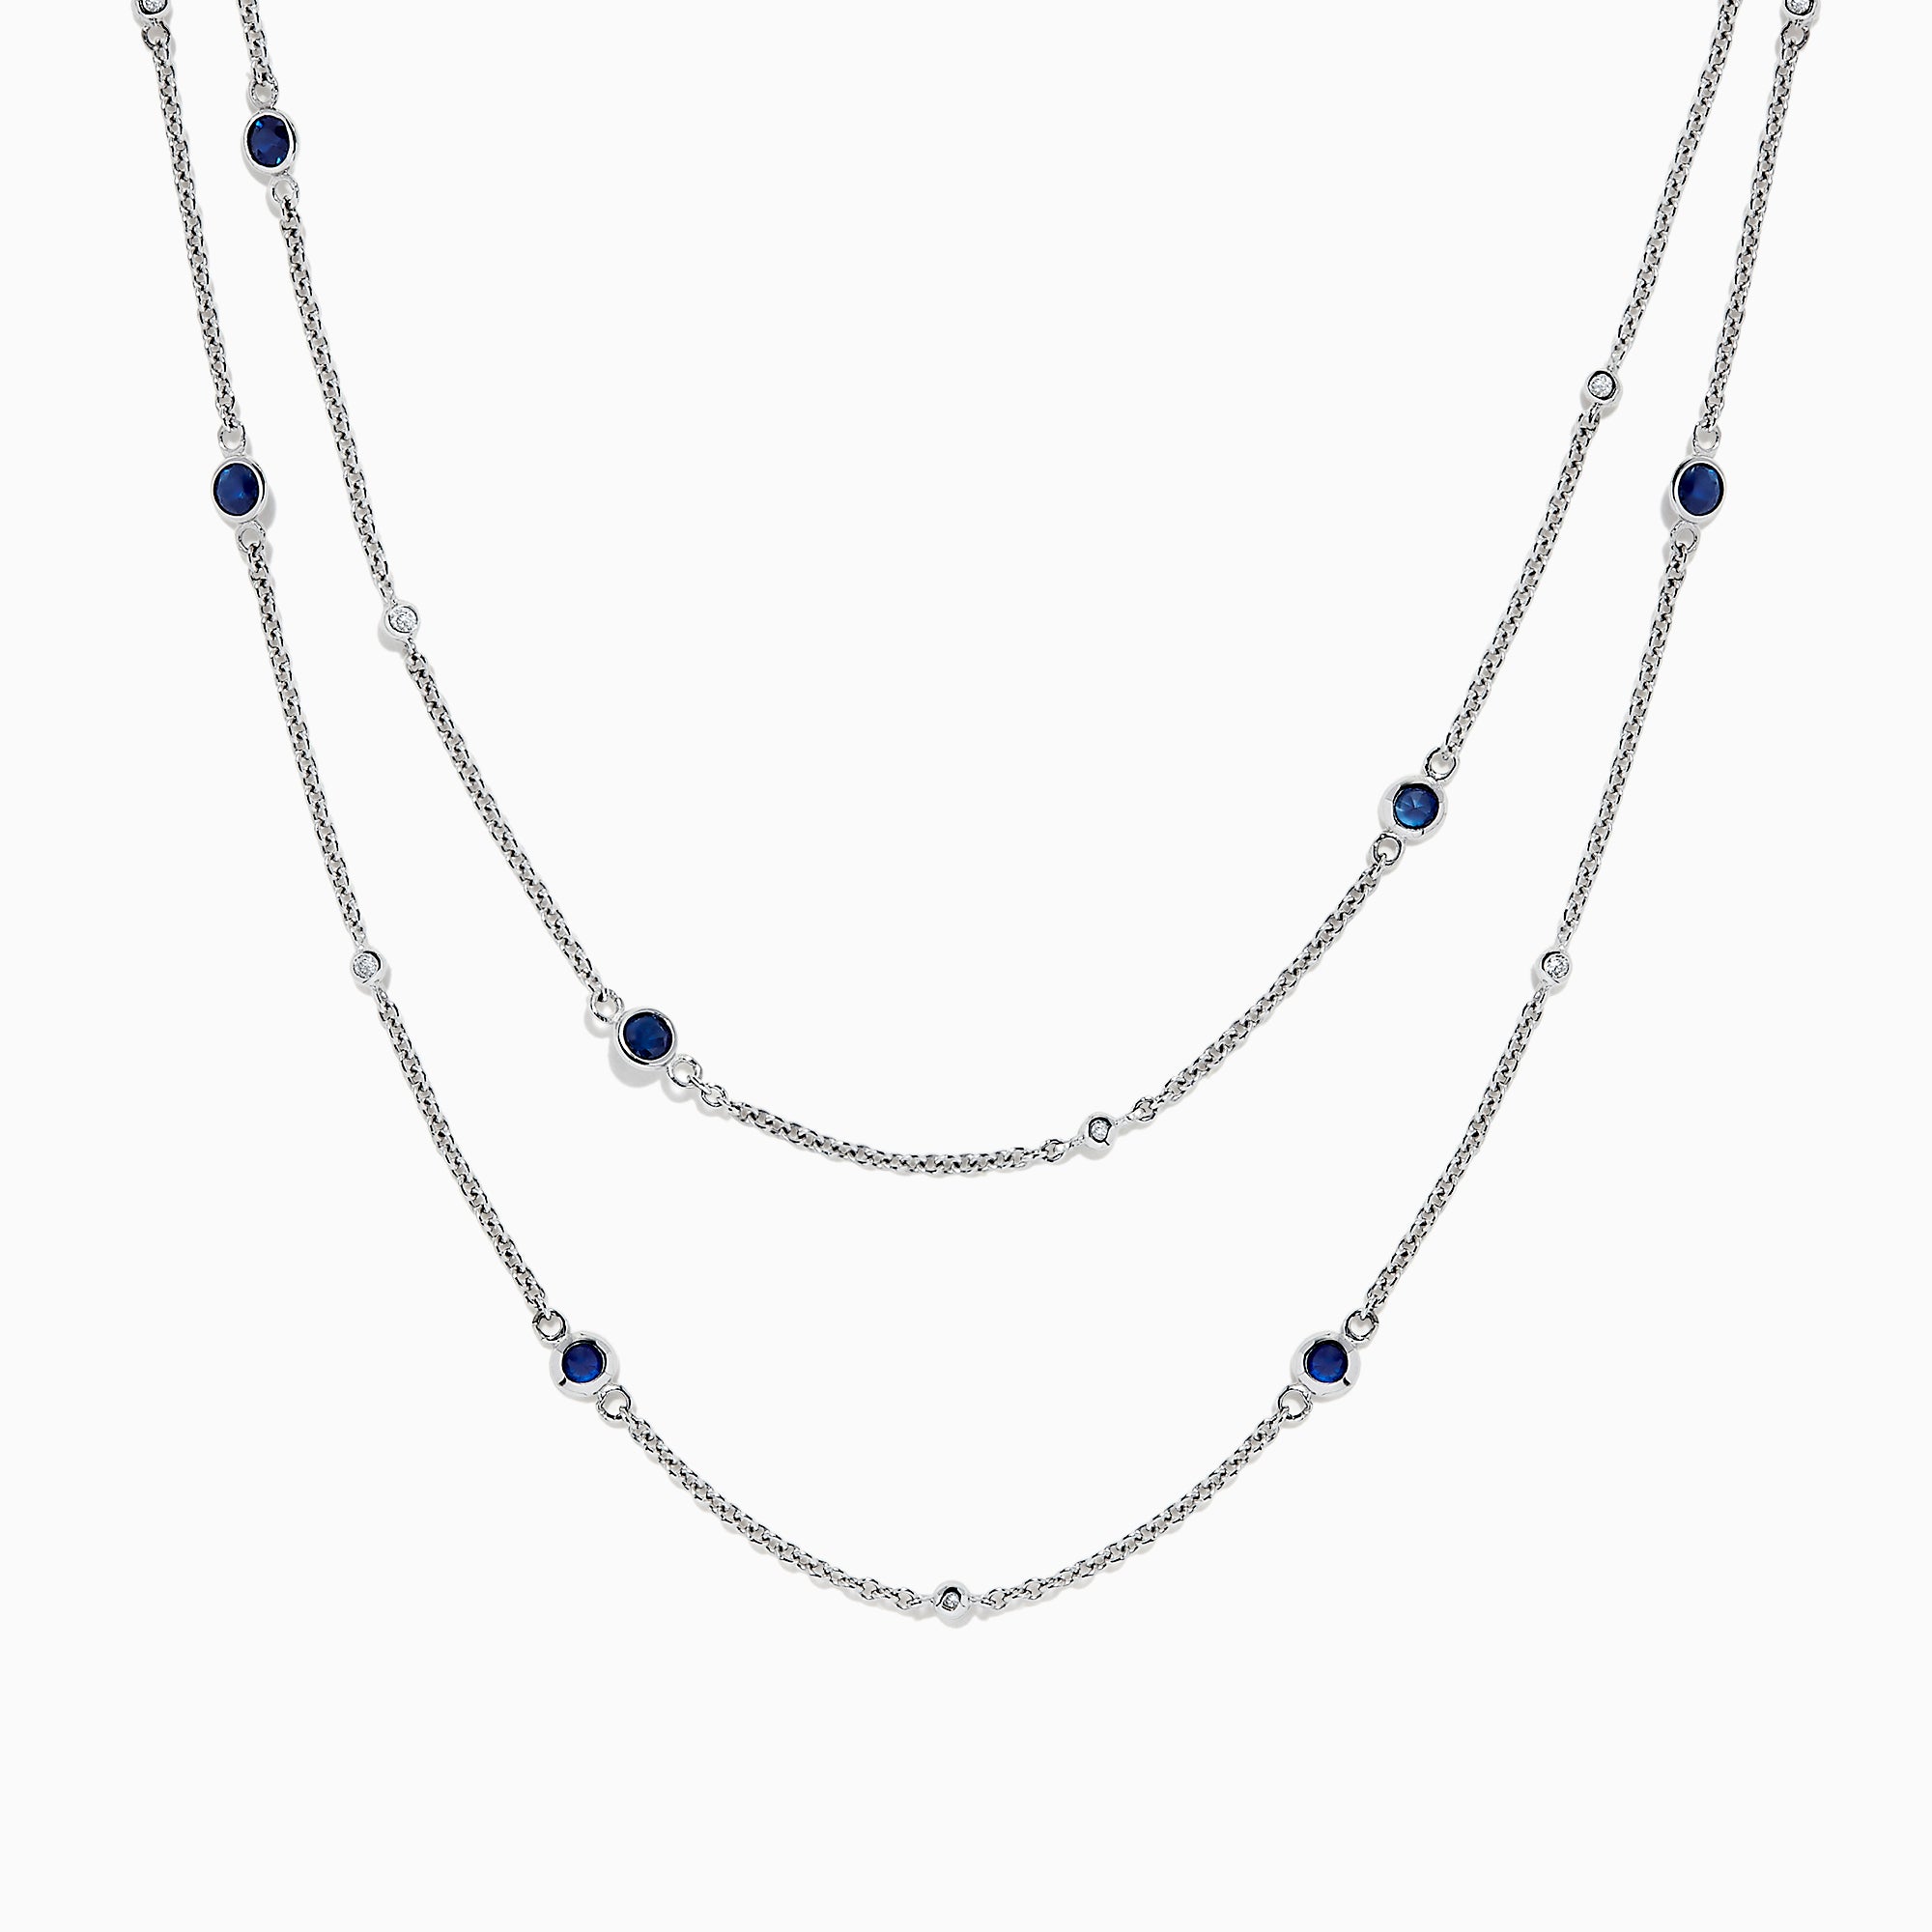 Effy 14K White Gold Sapphire and Diamond Station Necklace, 2.43 TCW